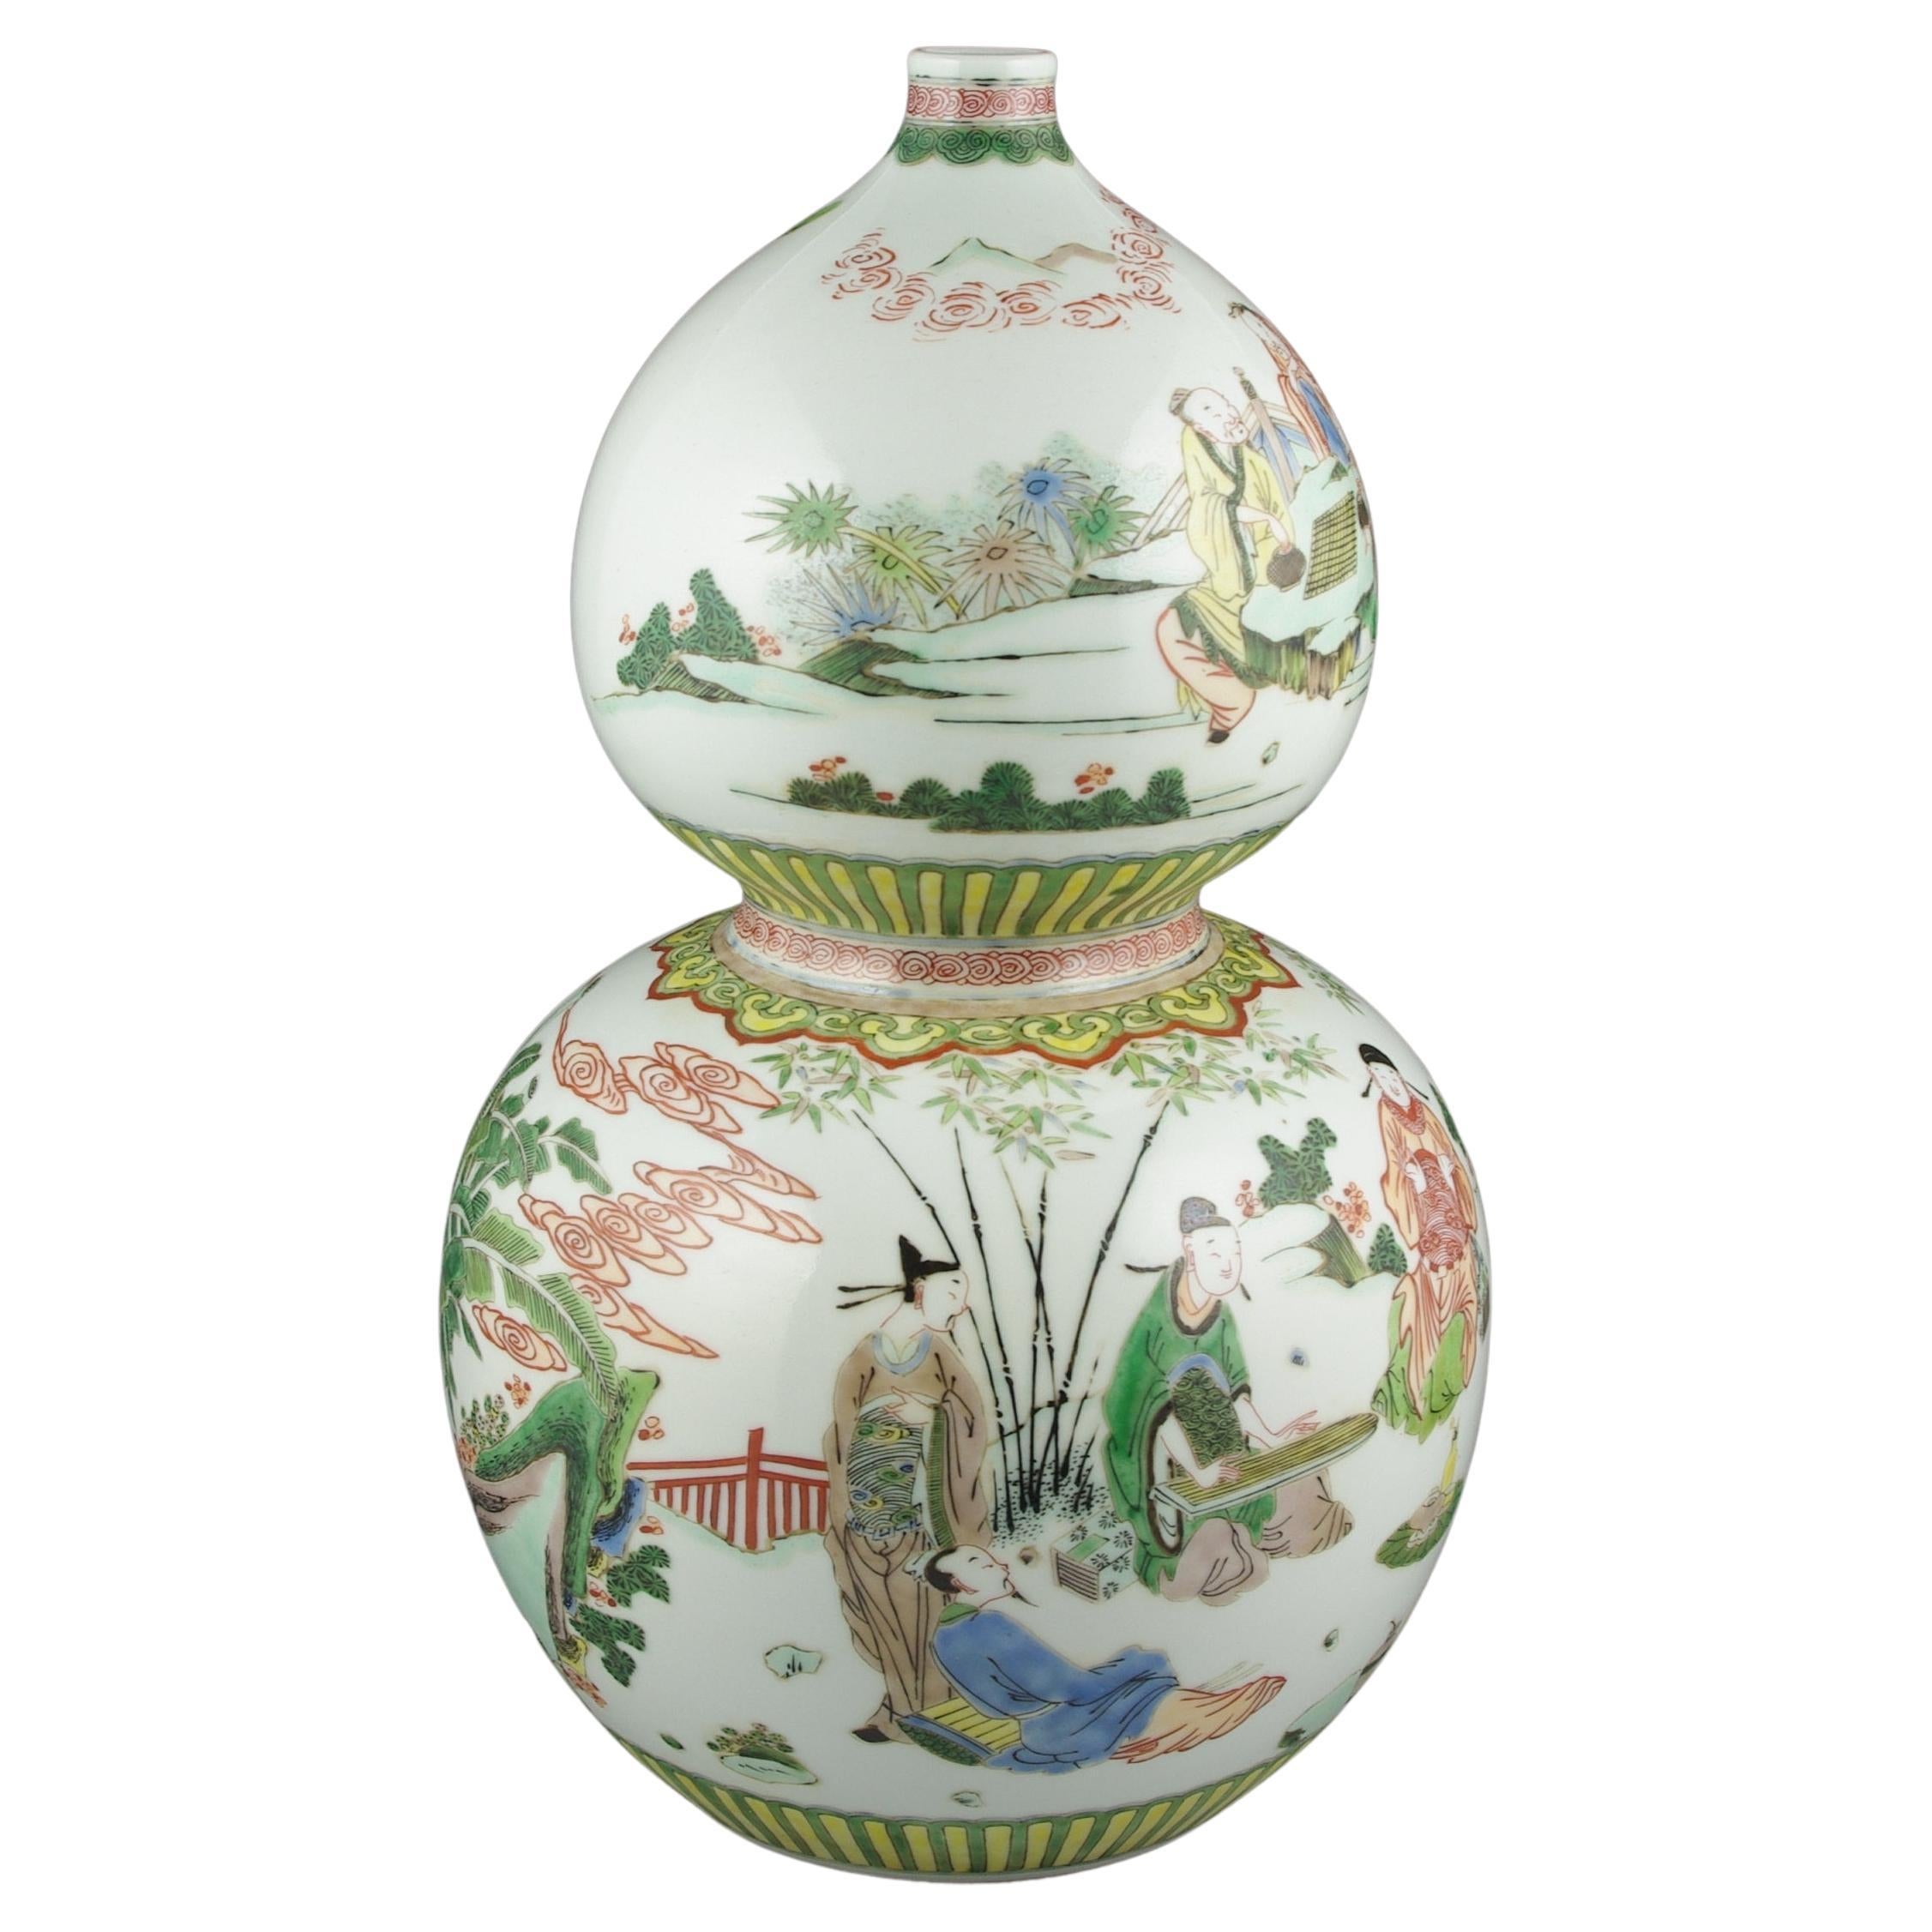 A grand and splendid antique Chinese vase, crafted in the distinctive double gourd bottle form, showcases meticulous hand-painting in the vibrant fencai famille rose palette. The vase vividly portrays figures adorned in traditional Qing attire,